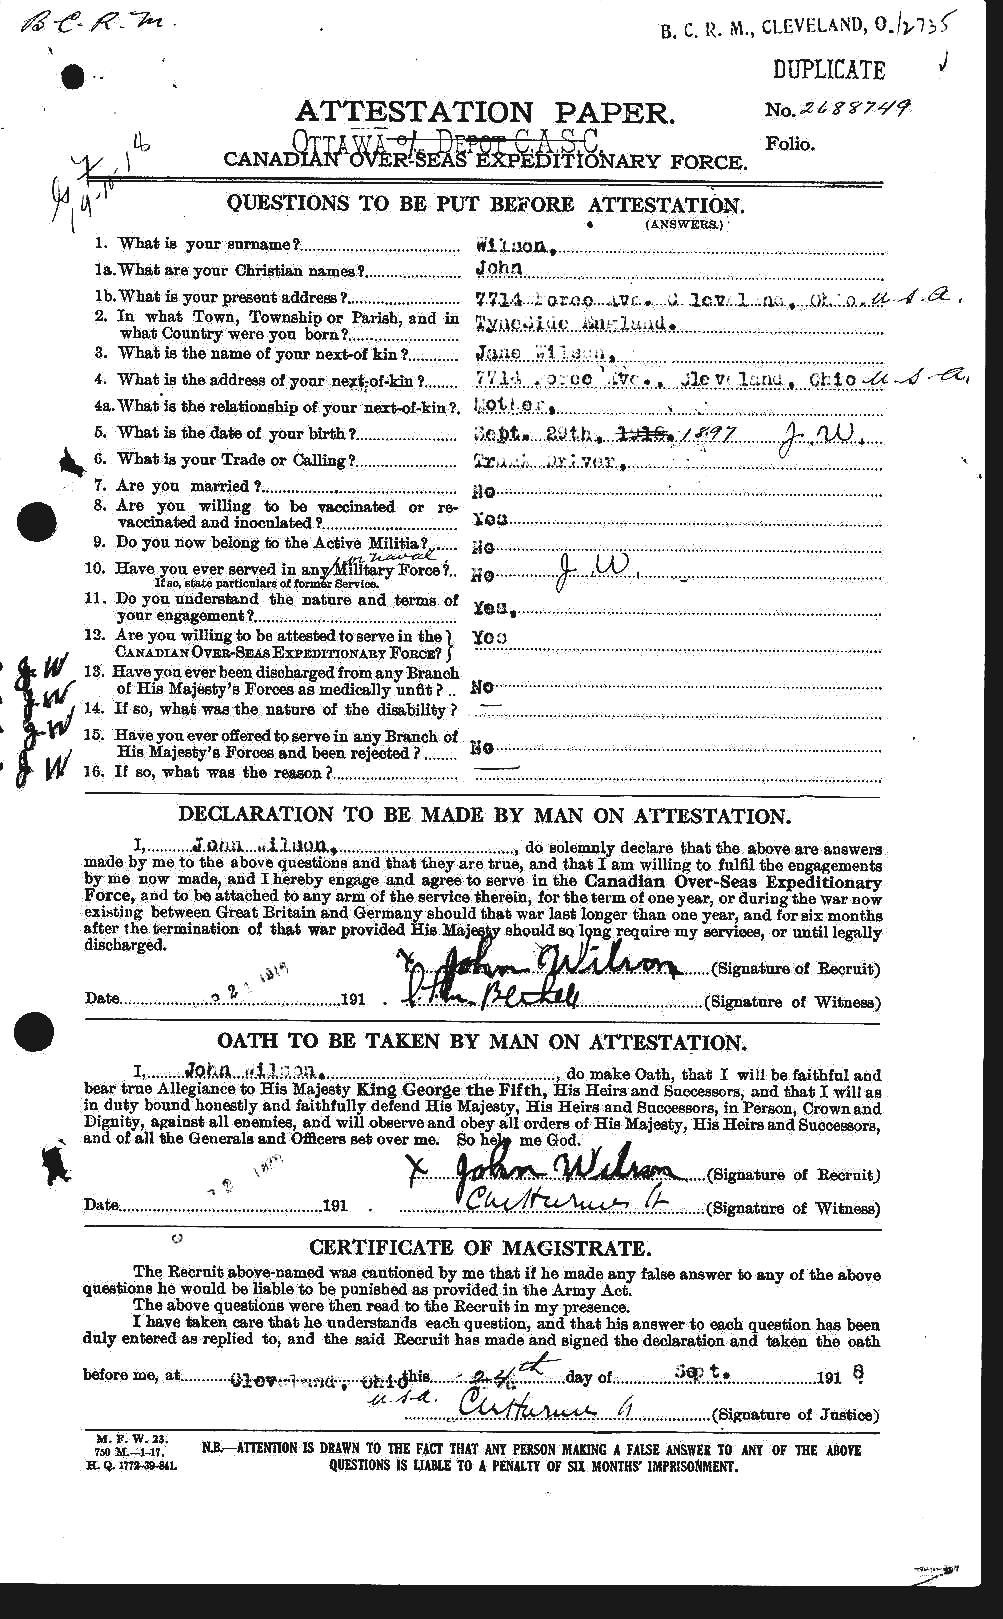 Personnel Records of the First World War - CEF 681532a